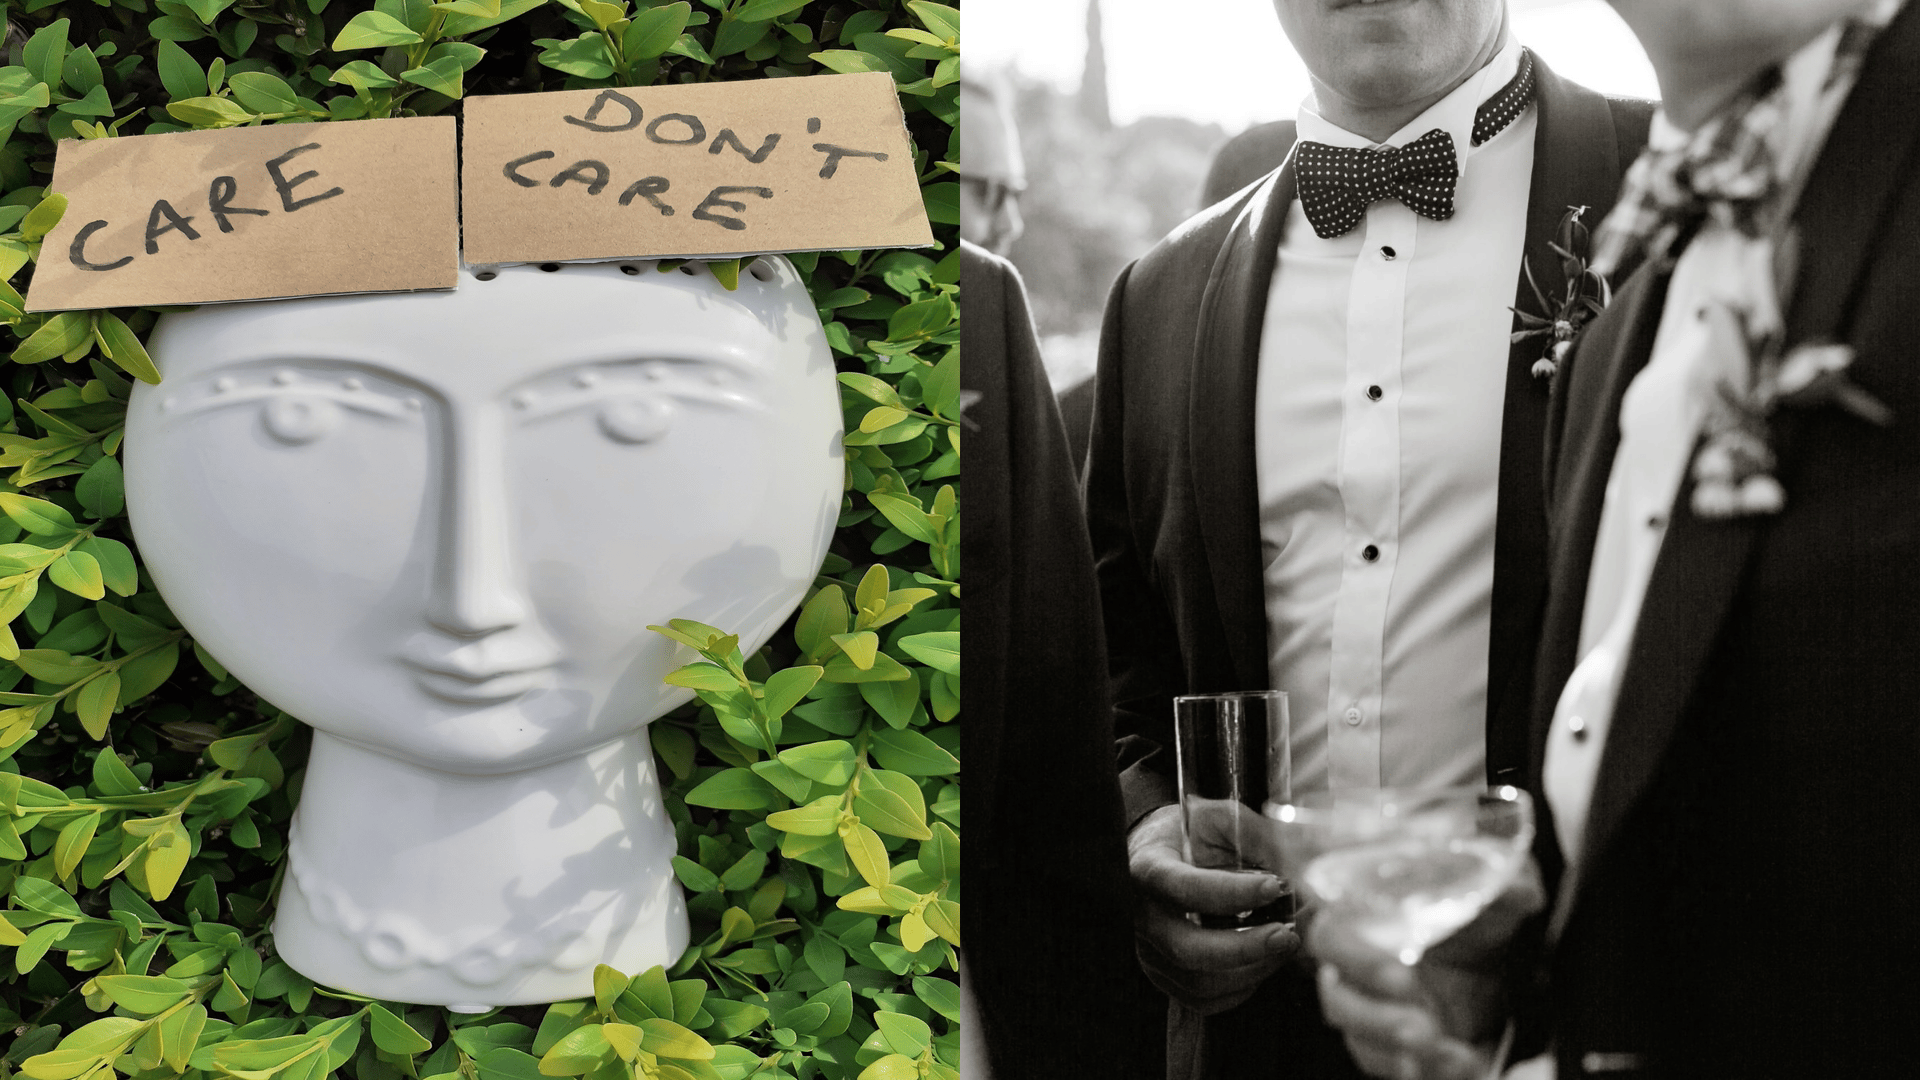 Two images: 1) A sculptural head with a sign stuck on it that says 'care don't care' (2) Men wearing black tie suits and holding various cocktail and champagne glasses at a party